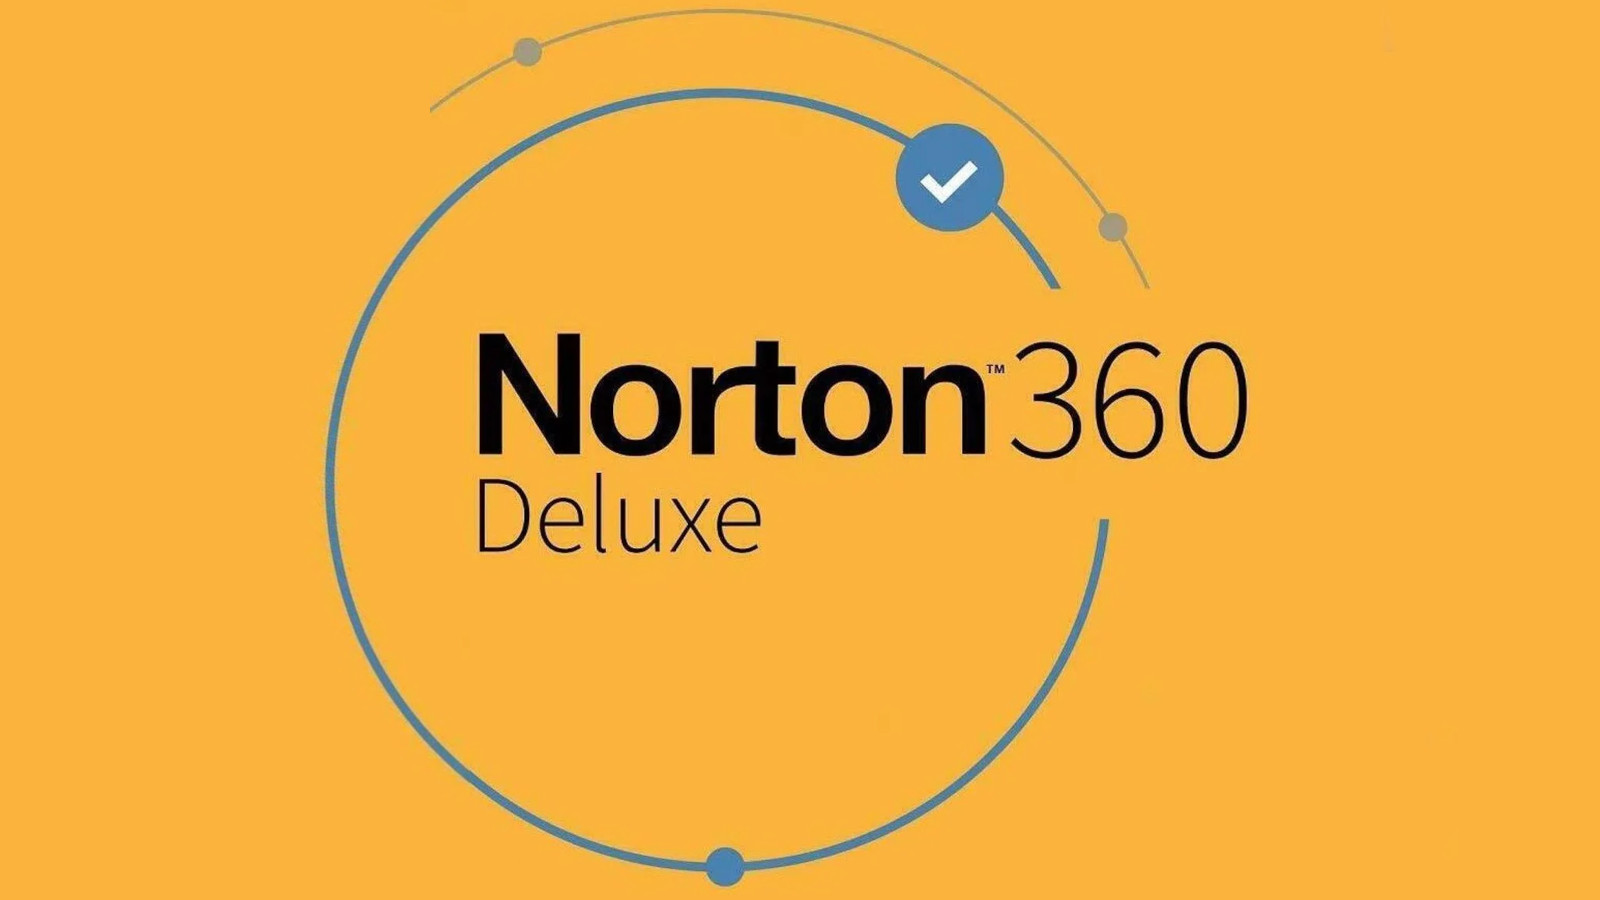 Norton Antivirus 360 Deluxe BR Key (1 Year / 5 Devices) 10.7$